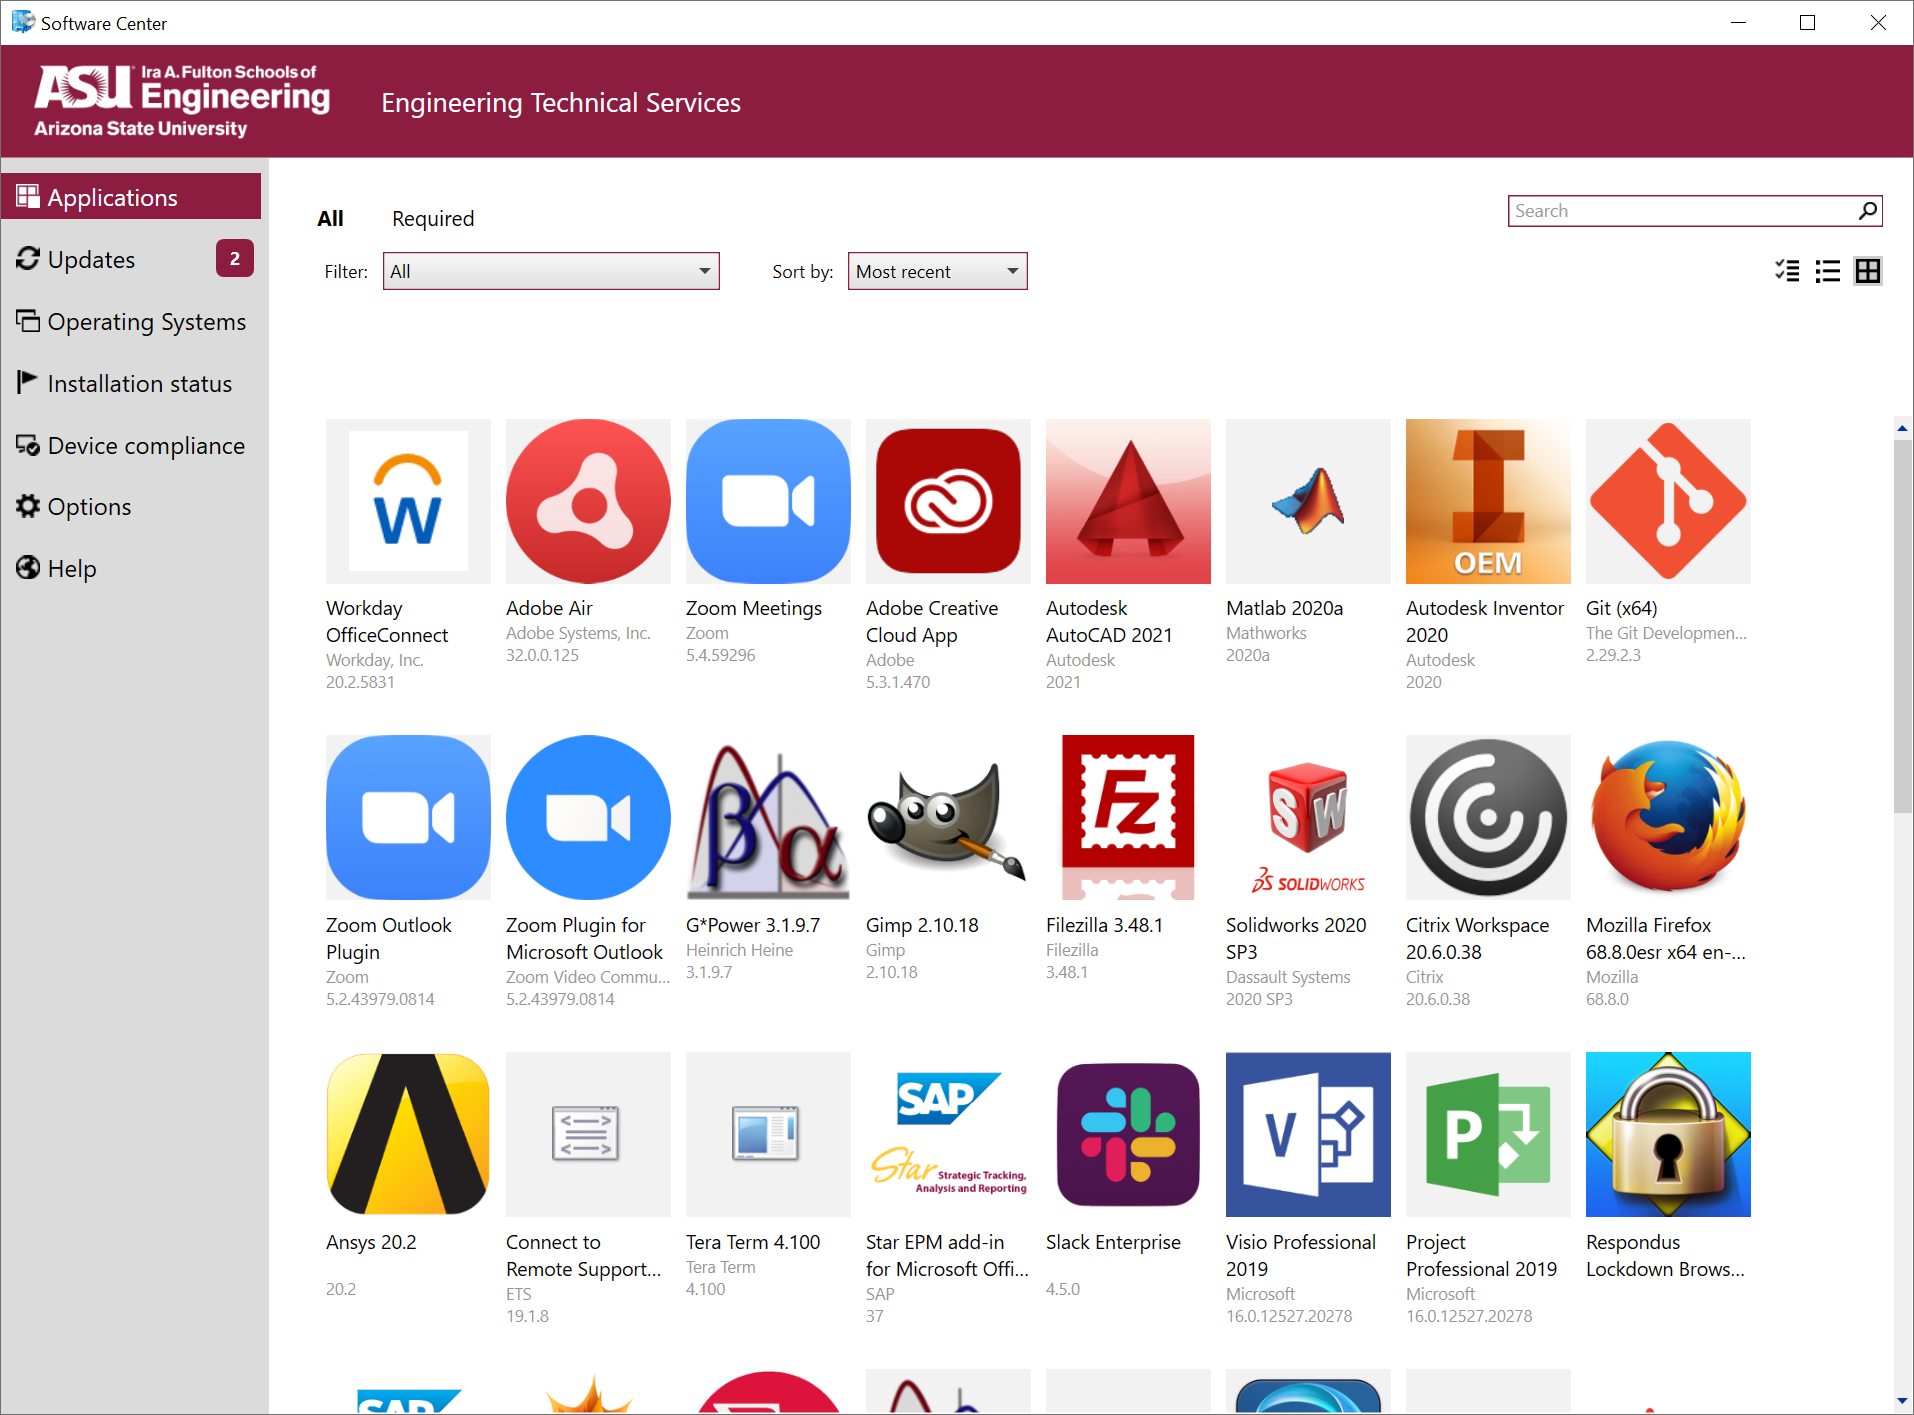 A screenshot of the software center showing several app icons